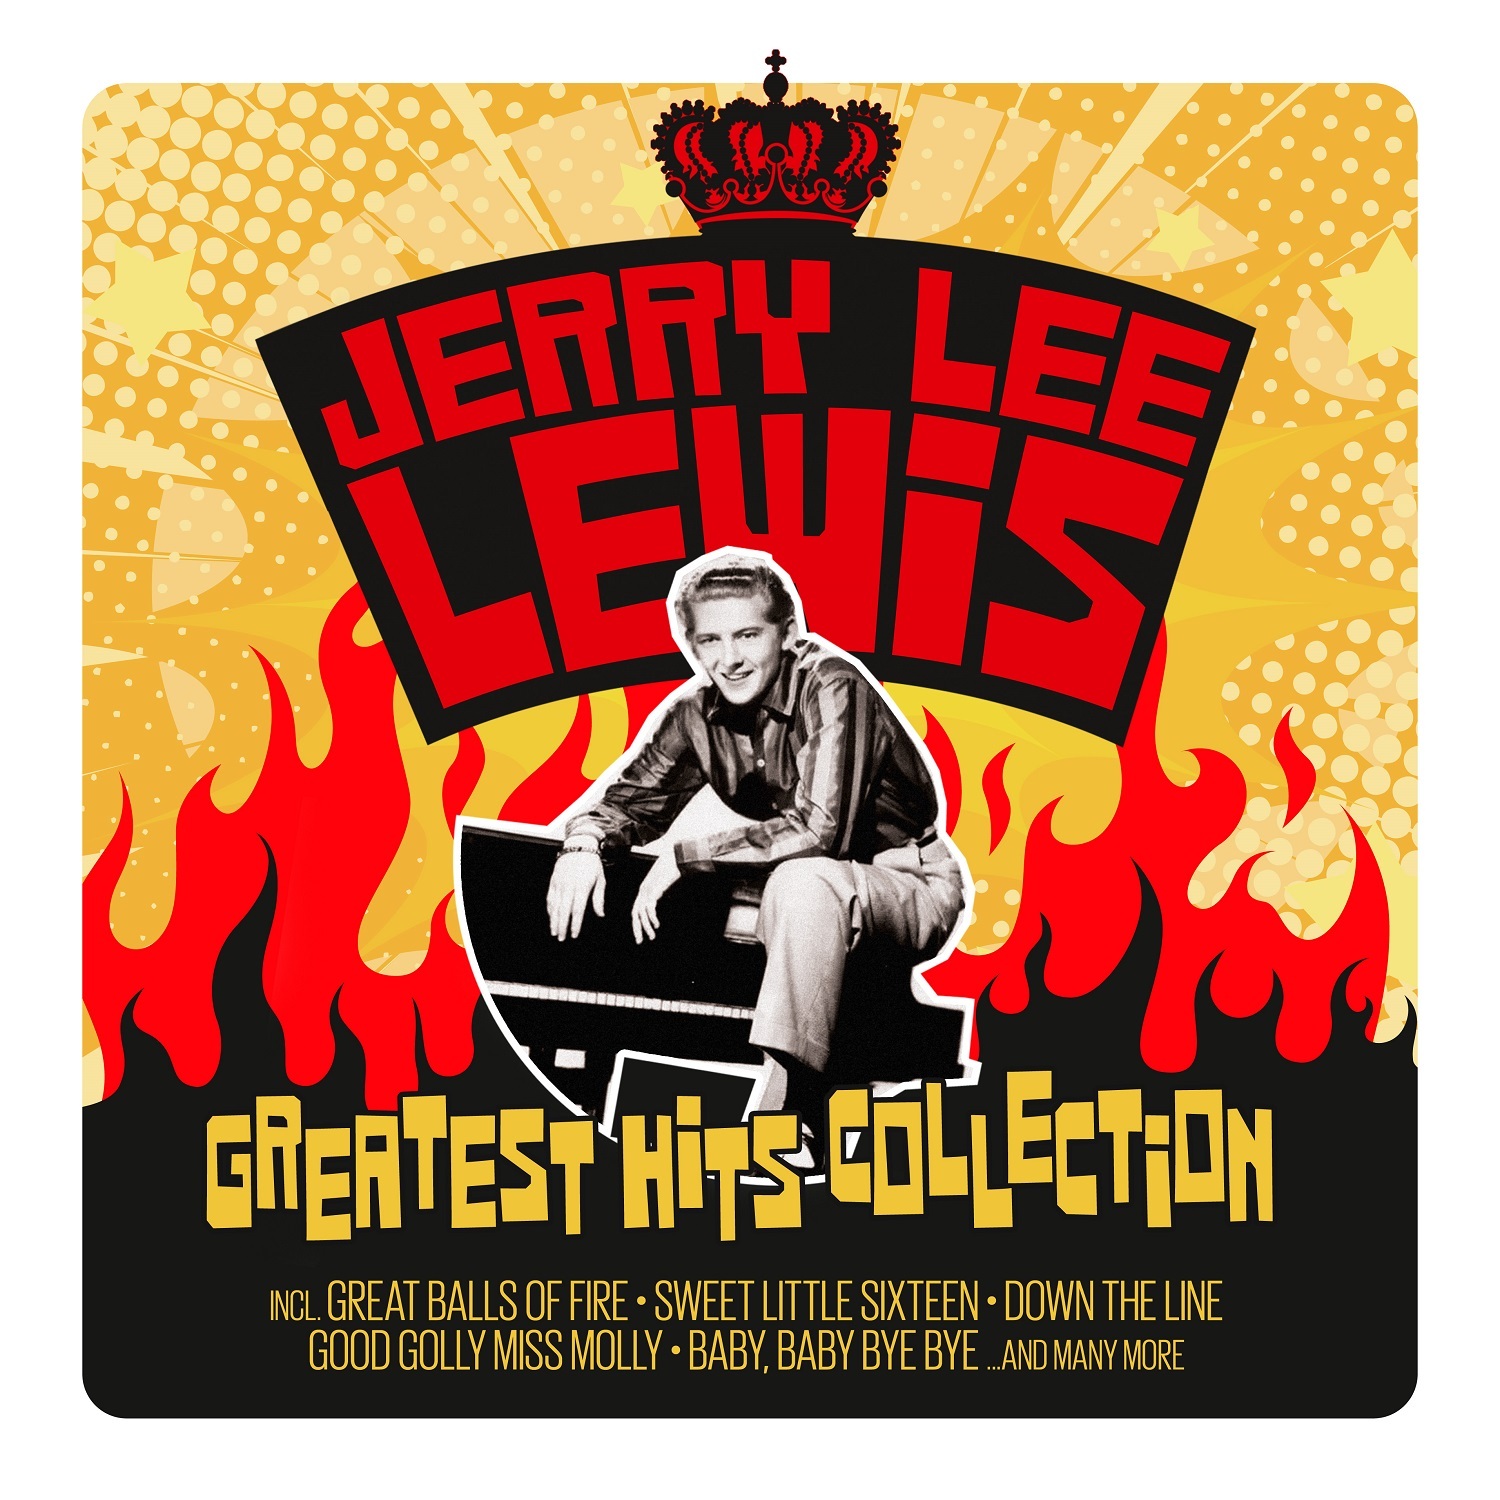 Greatest hits collection. Jerry Lee Lewis great balls of Fire. Jerry Lee Lewis the collection LP. Jerry Lee Lewis great balls of Fire album. Jerry Vale "Greatest Hits" обложки альбомов.